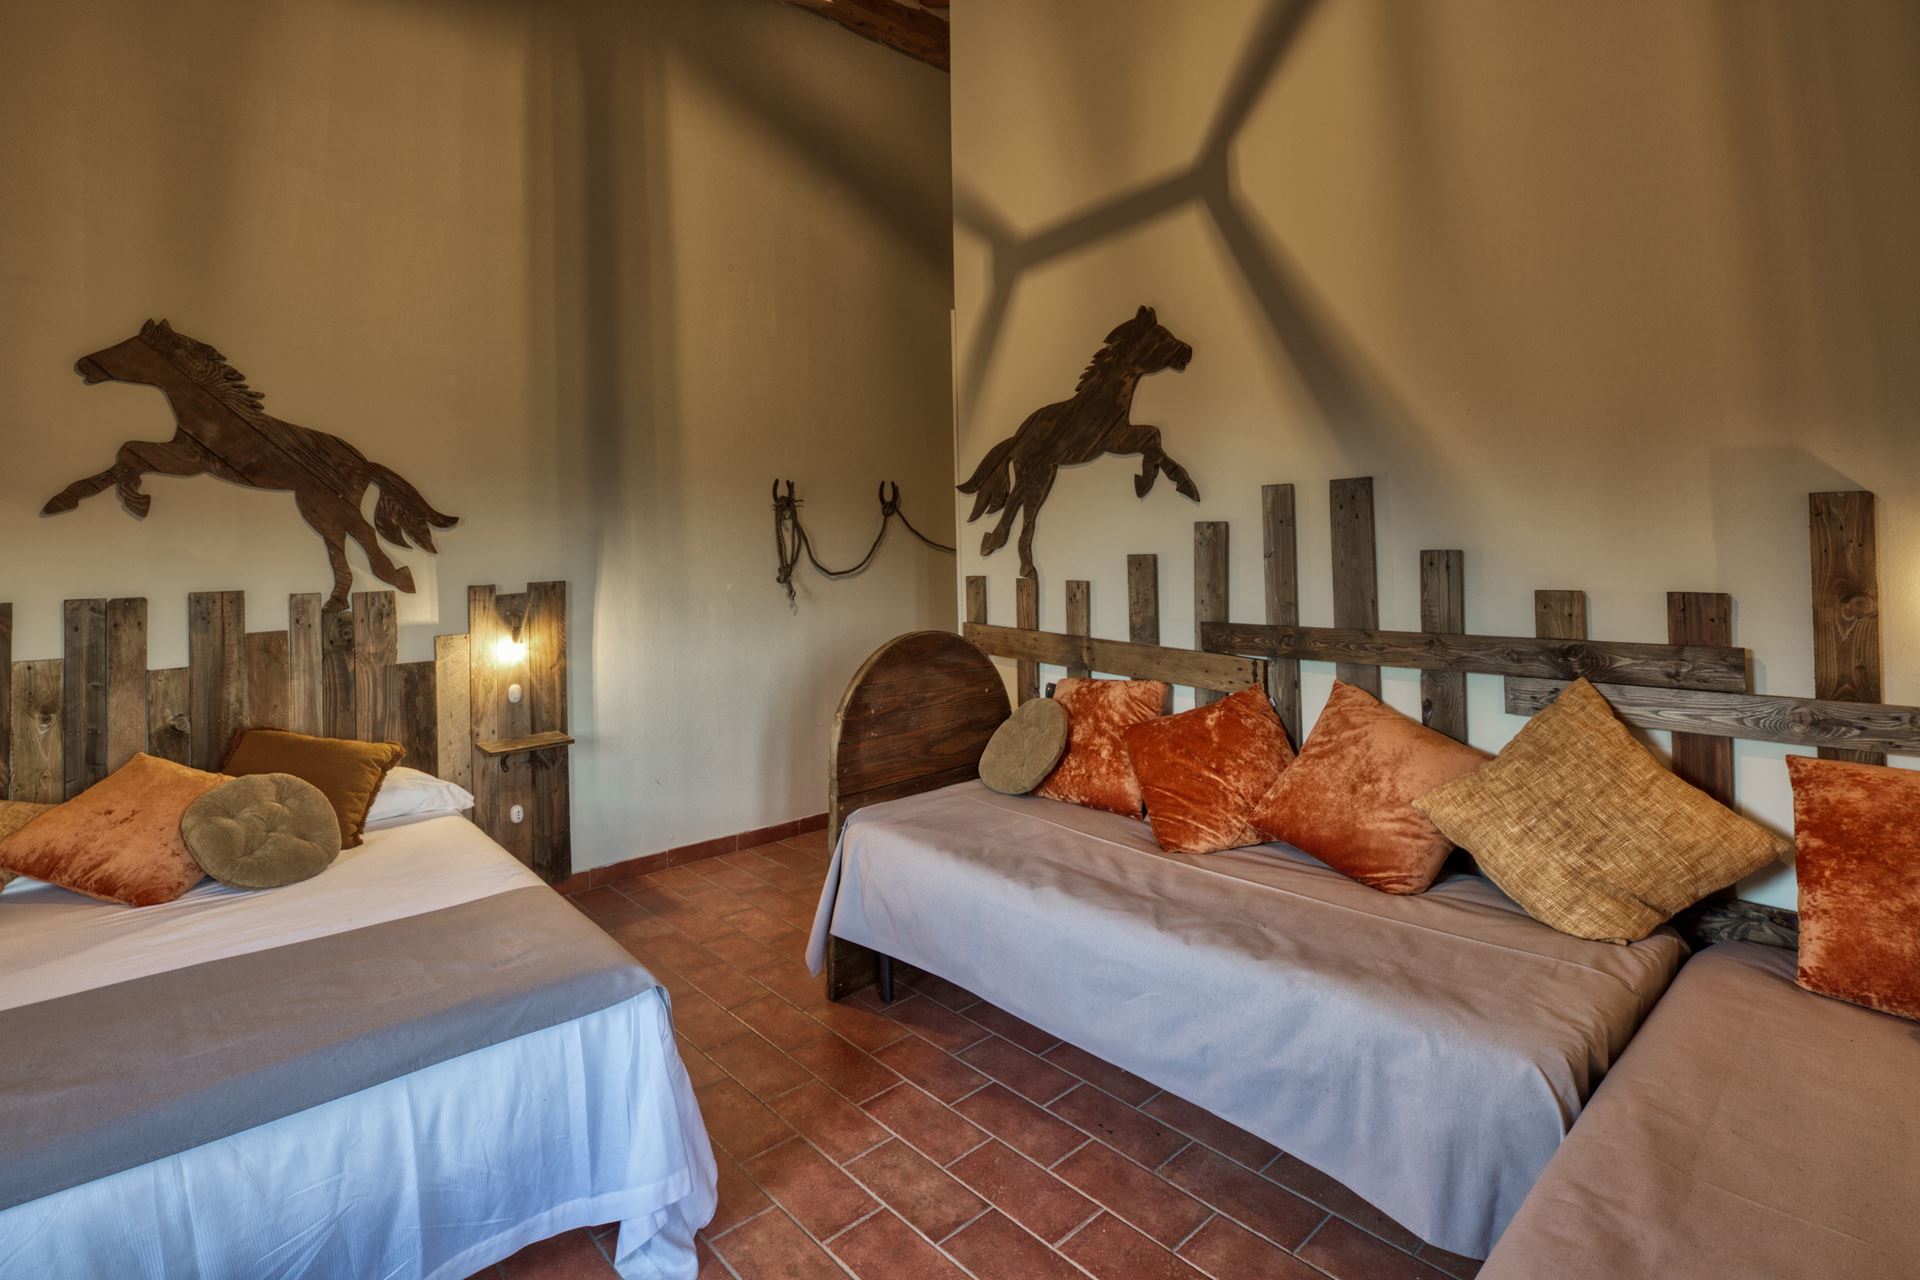 The Country Room is characterised by the rustic and genuine feel of authentic country life.